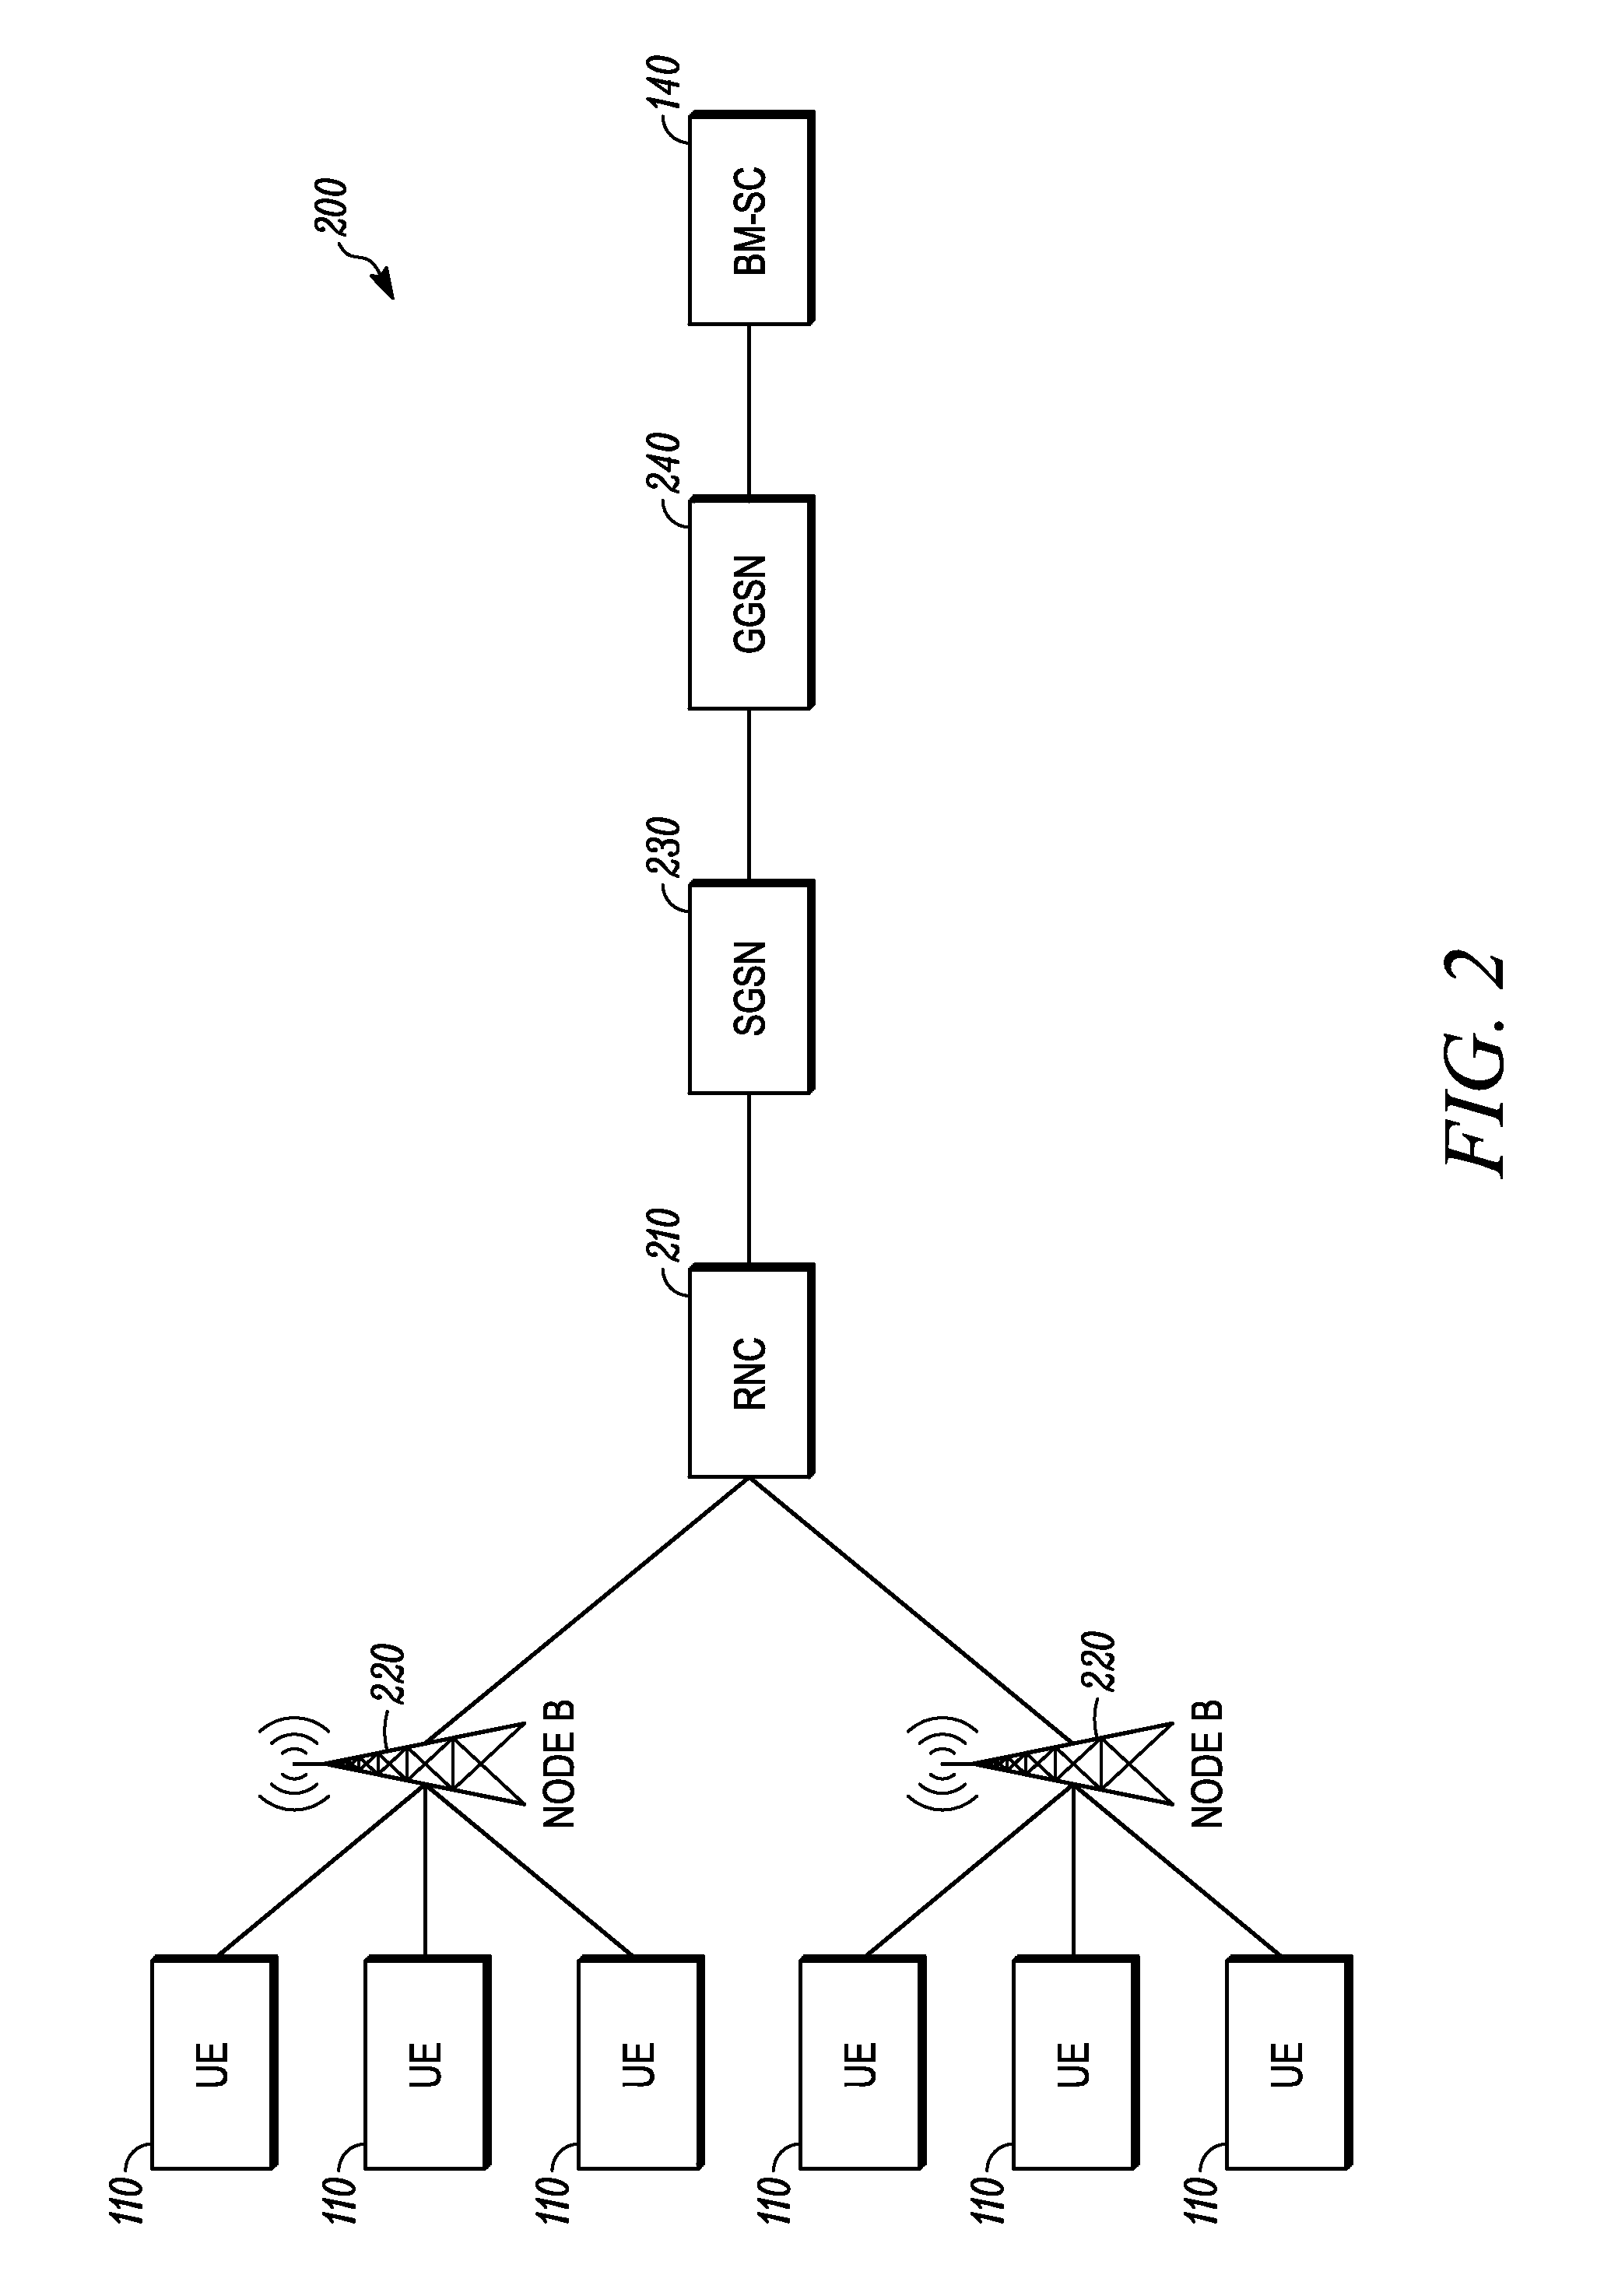 Method to control a multimedia broadcast multicast service(MBMS) mode of a MBMS session in a communication system